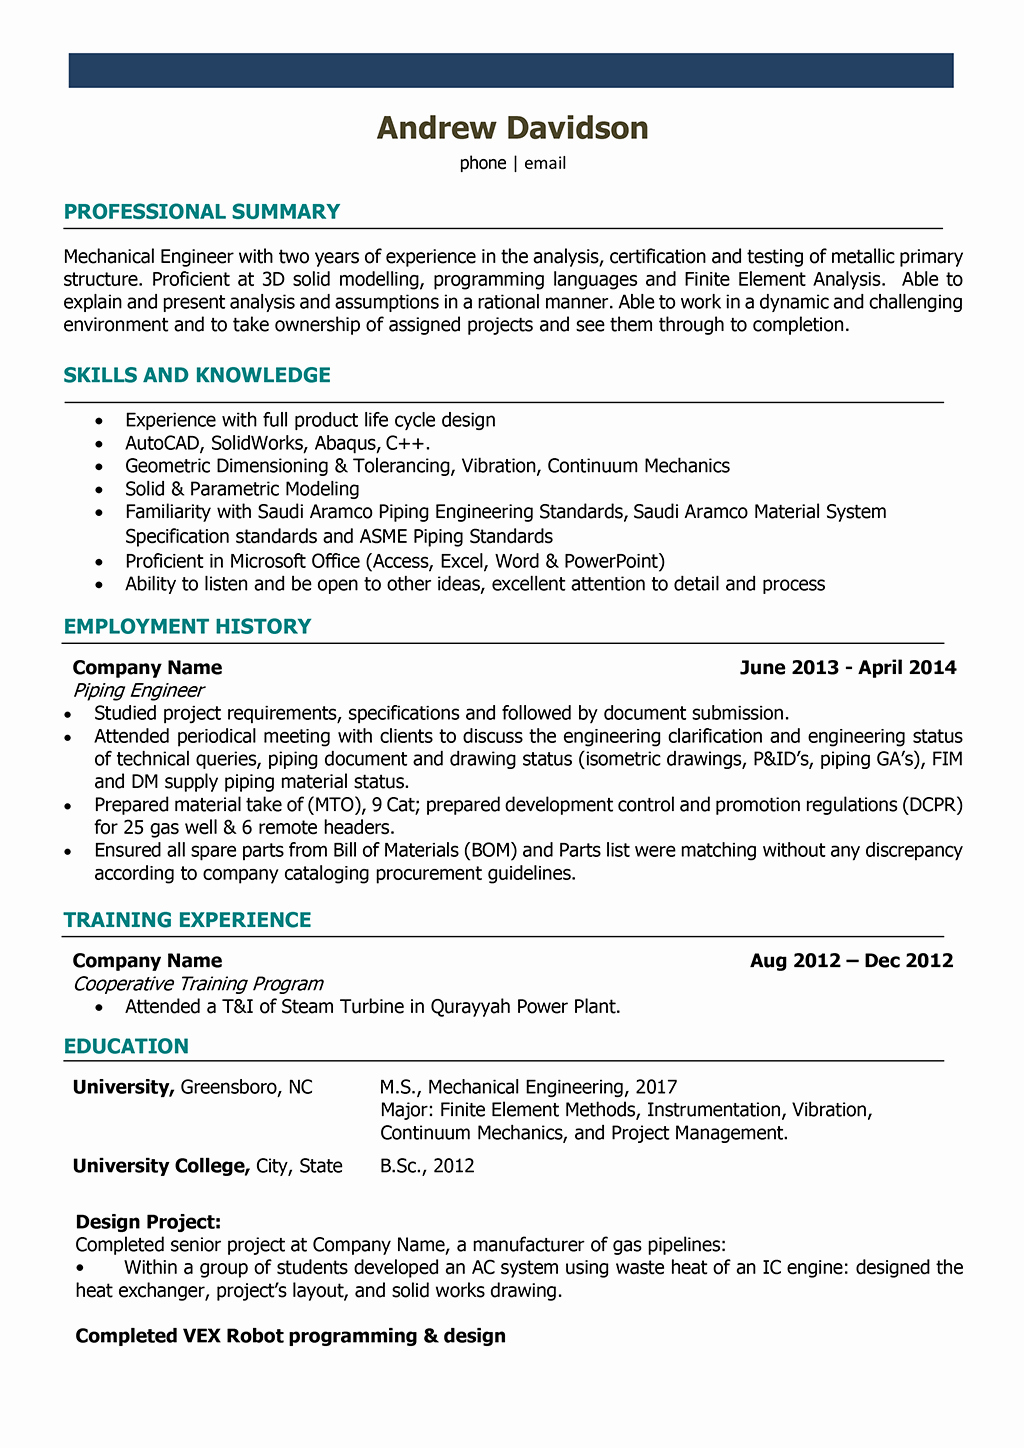 Entry Level Mechanical Engineering Resume Beautiful Mechanical Engineer Resume Samples and Writing Guide [10